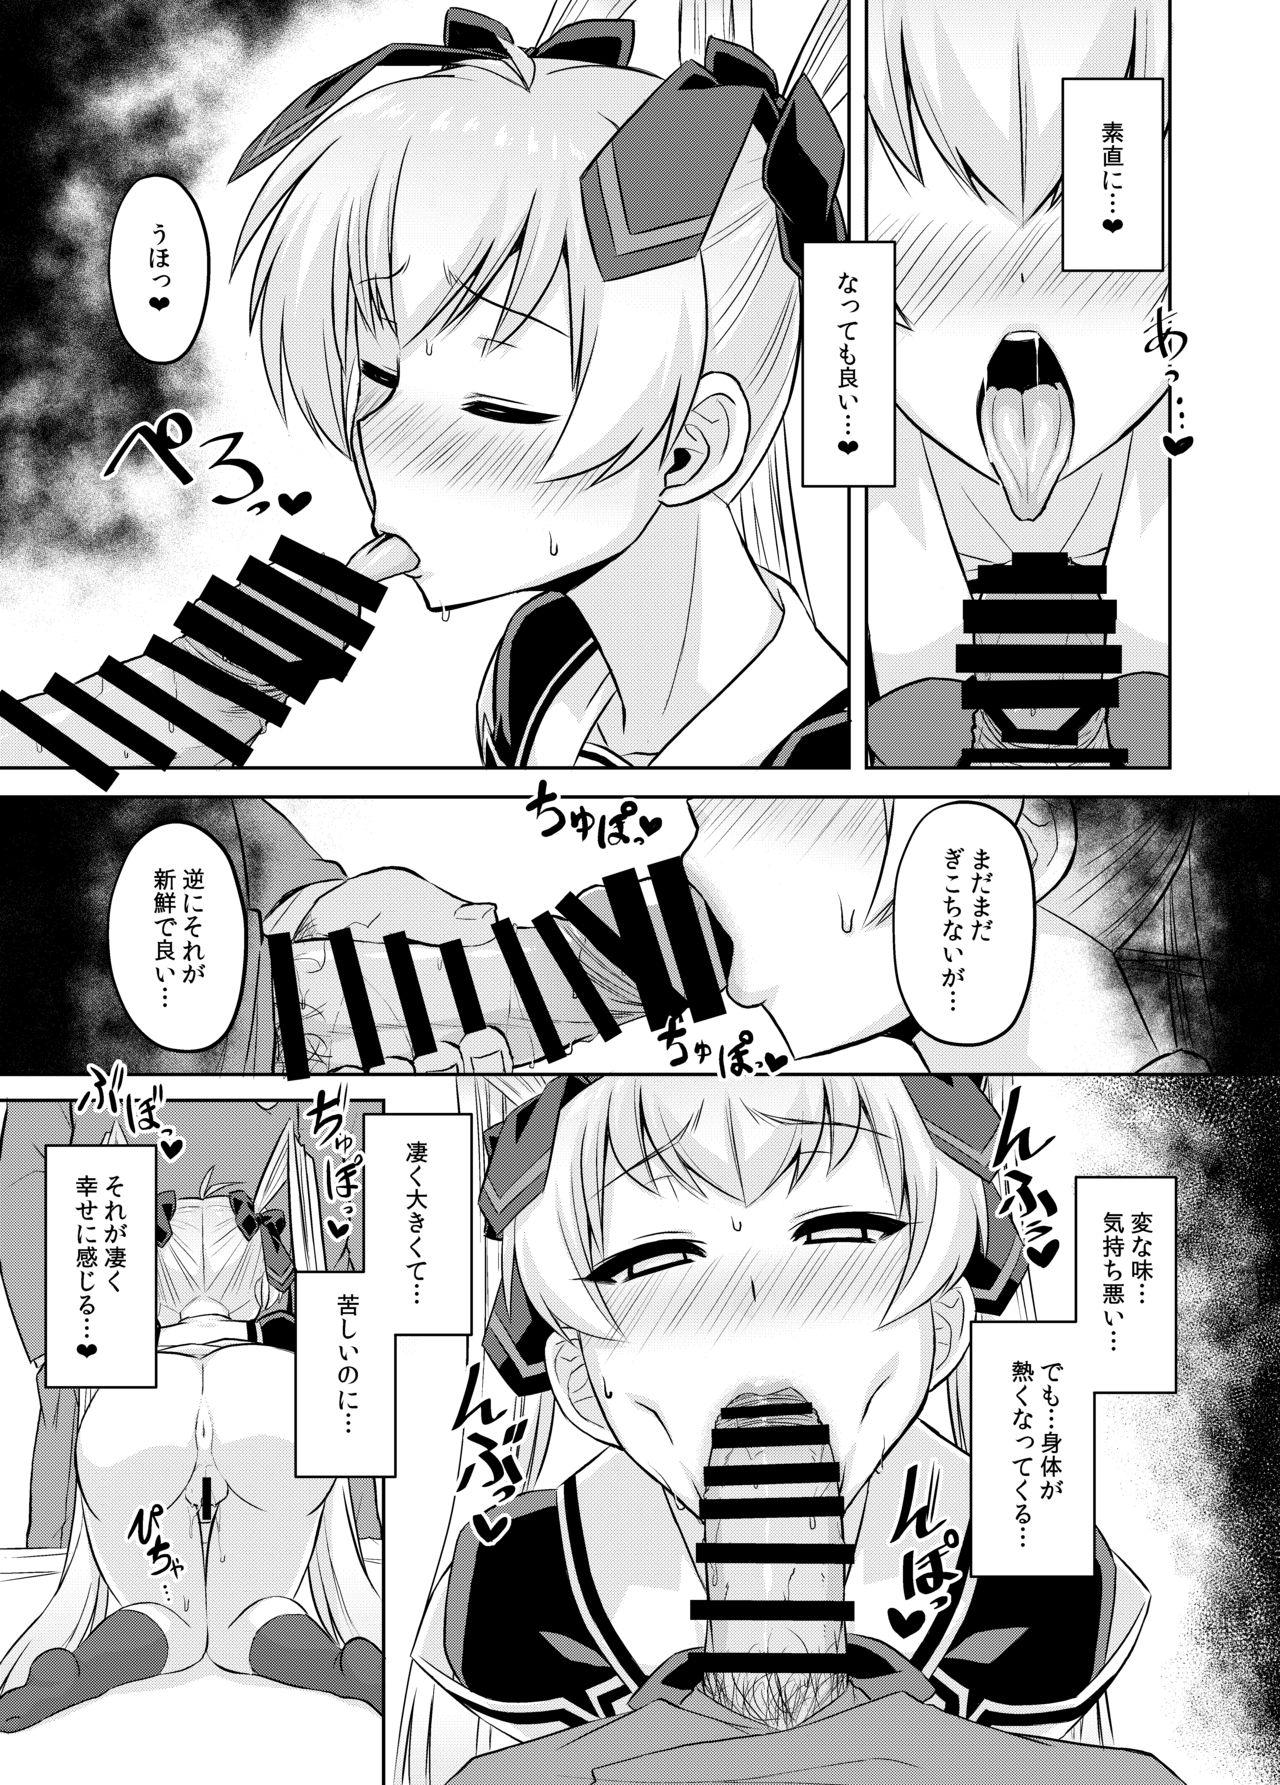 Friends NetoLove05 - Muv-luv Reversecowgirl - Page 12